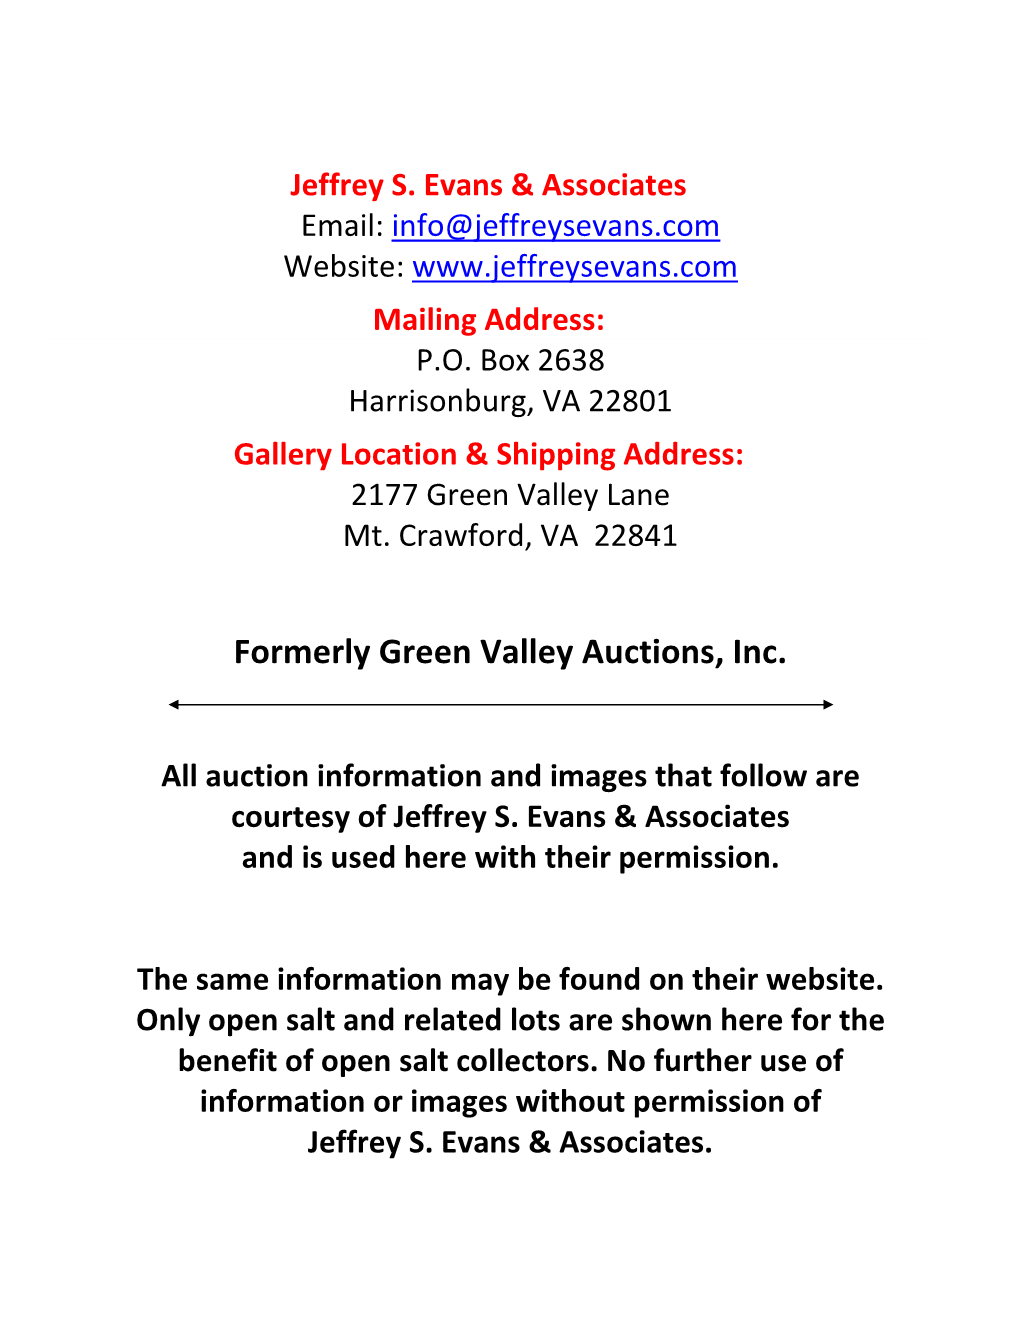 Formerly Green Valley Auctions, Inc